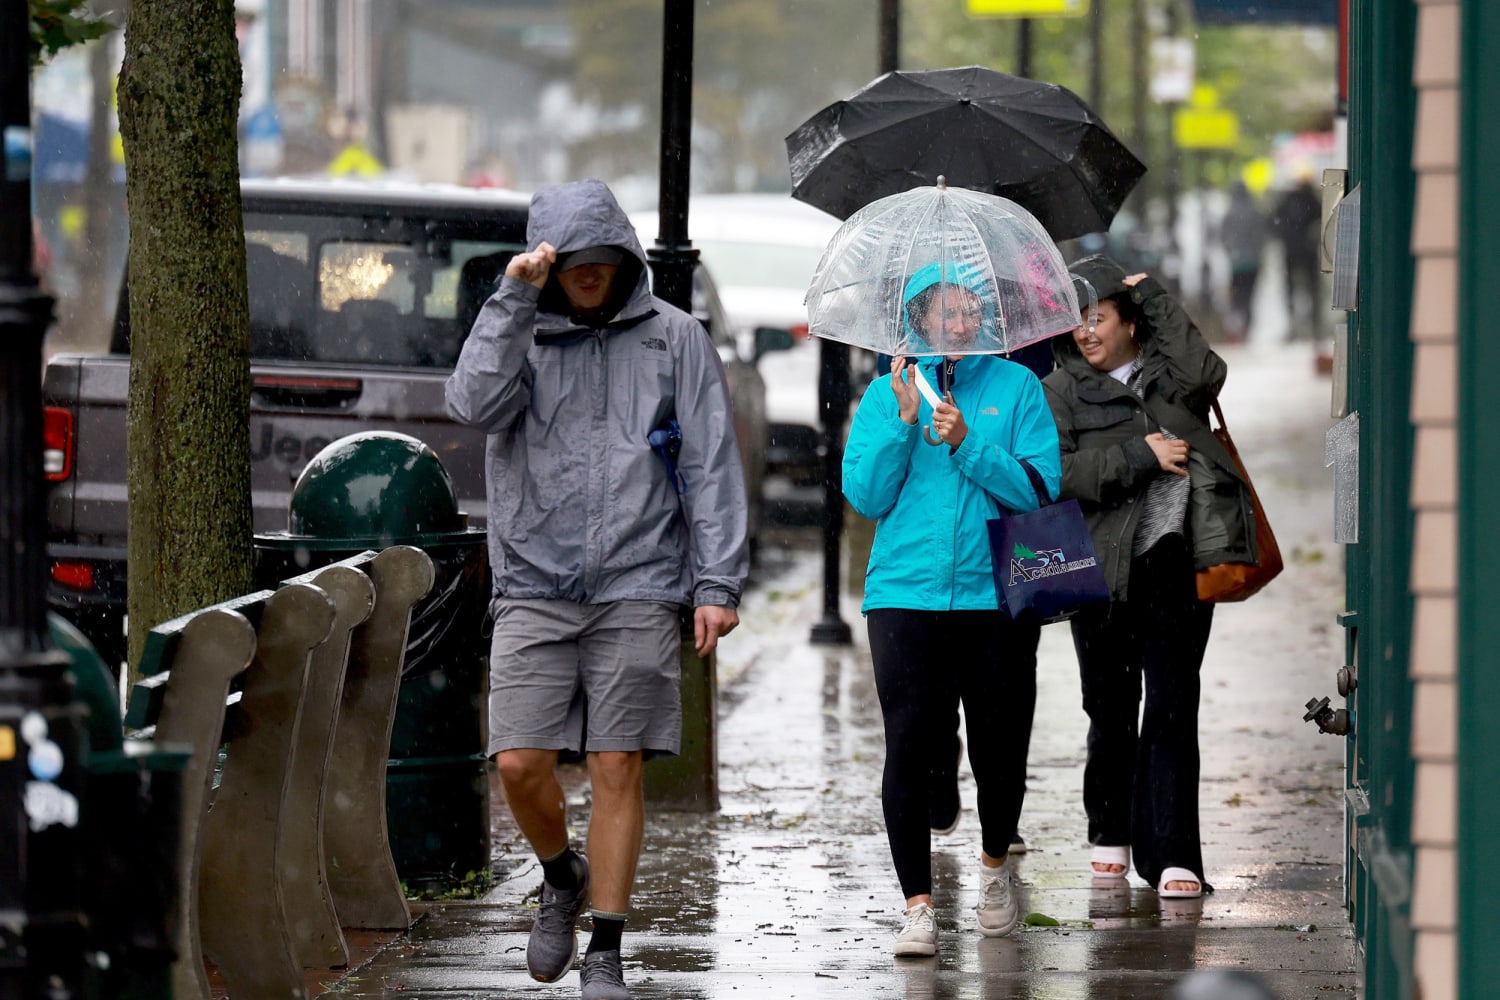 Deadly Atlantic storm Lee delivers high winds and rain before forecasters call off warnings in some areas